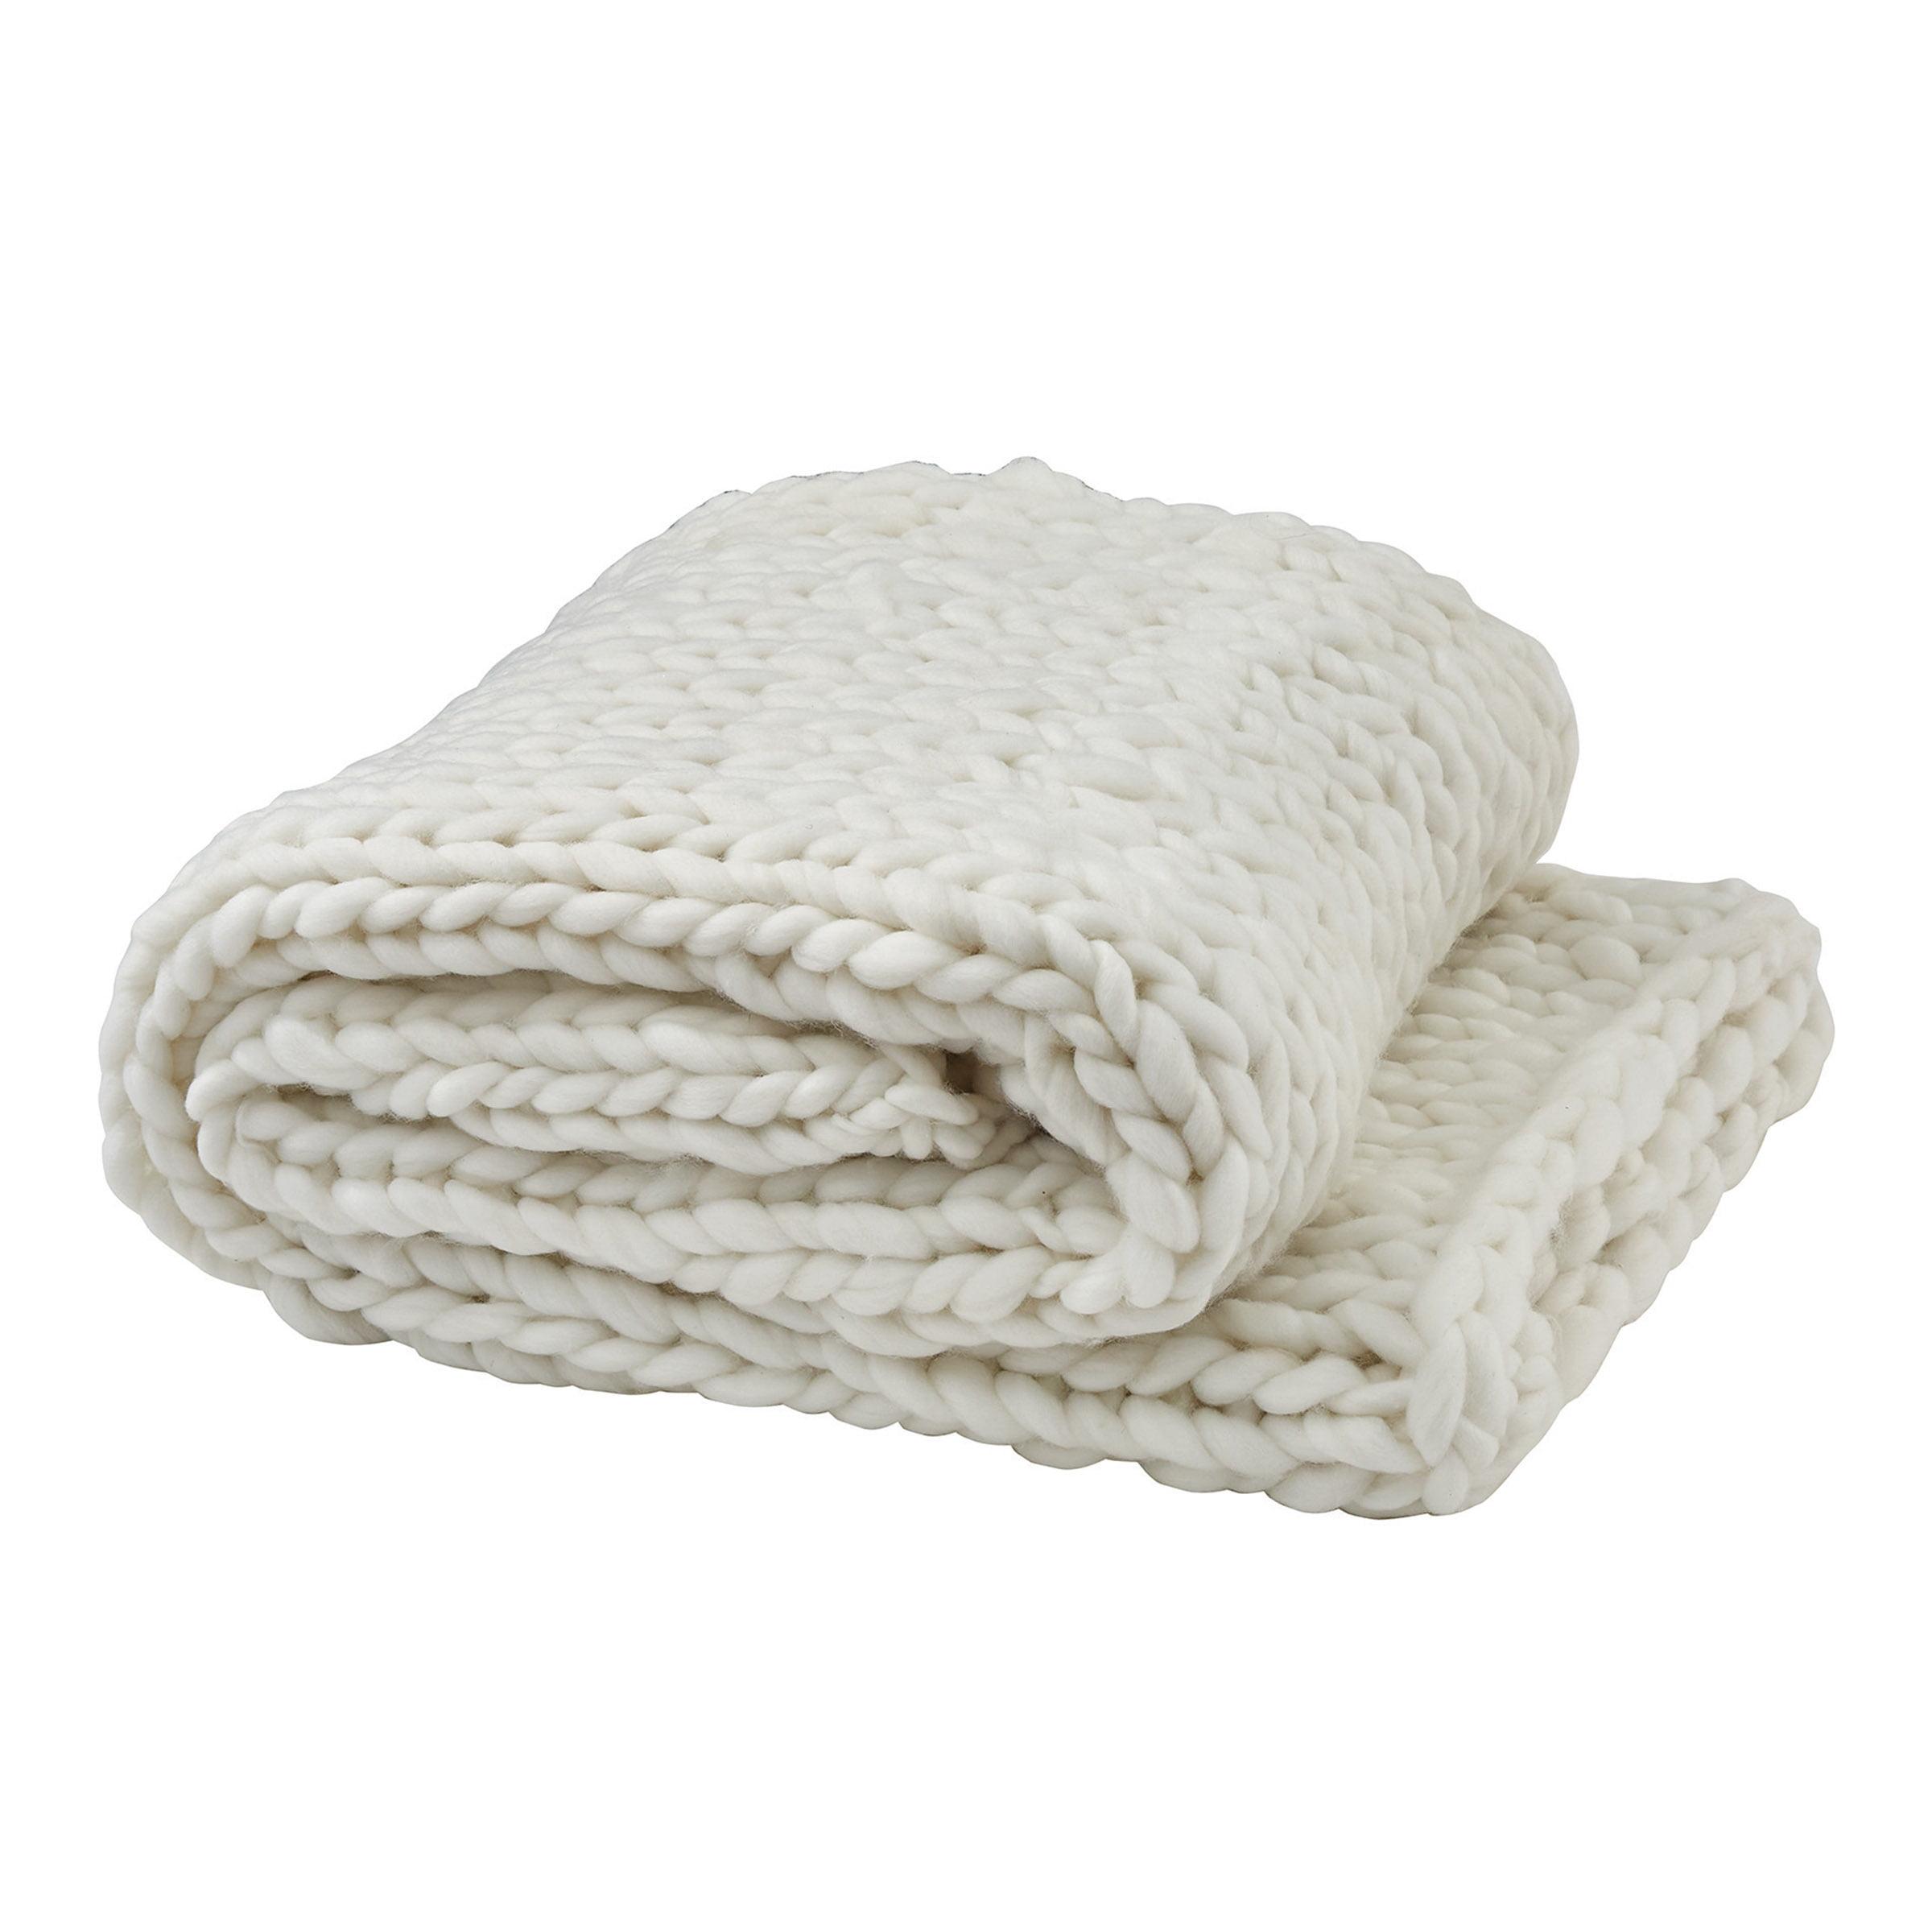 Luxurious Hand-Knitted Cozy Cotton Throw - White 11"